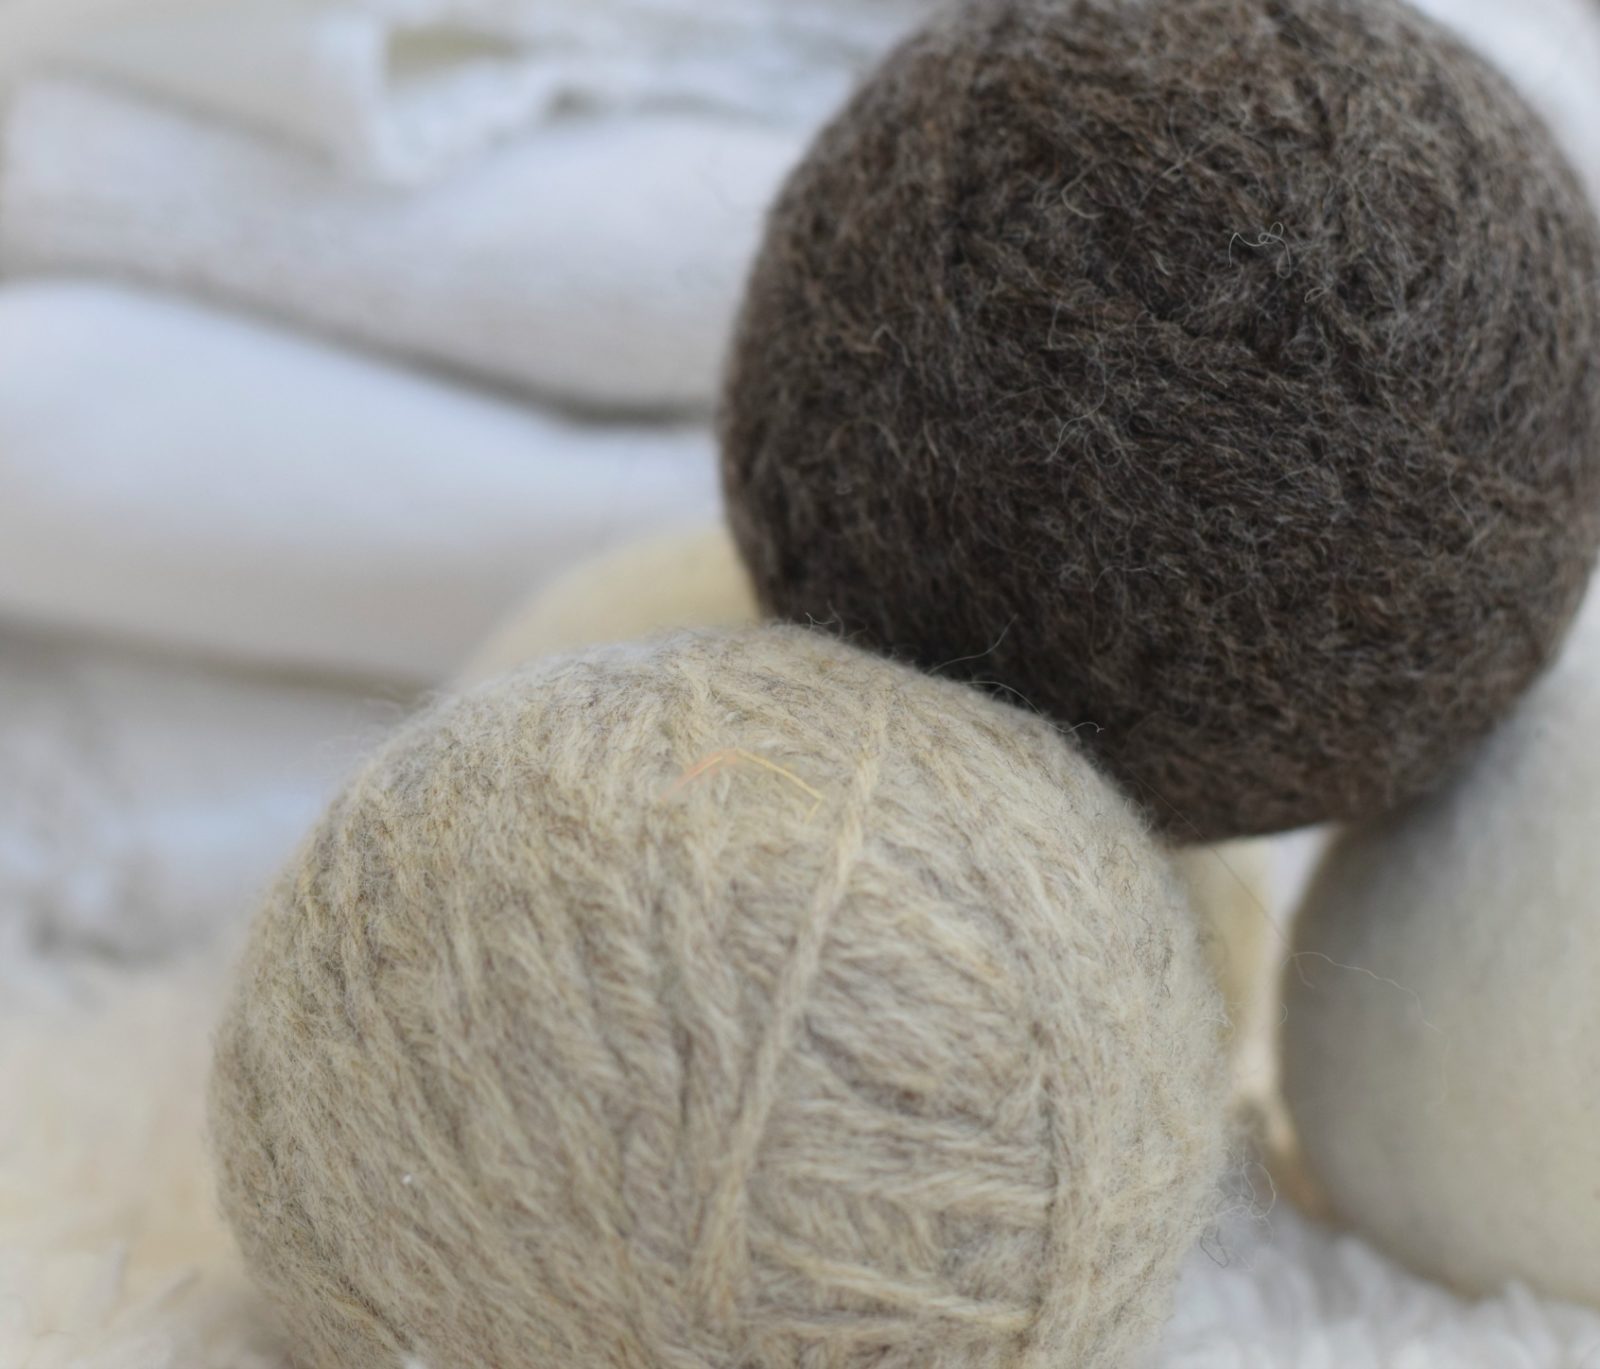 How To Make Dryer Balls with Yarn